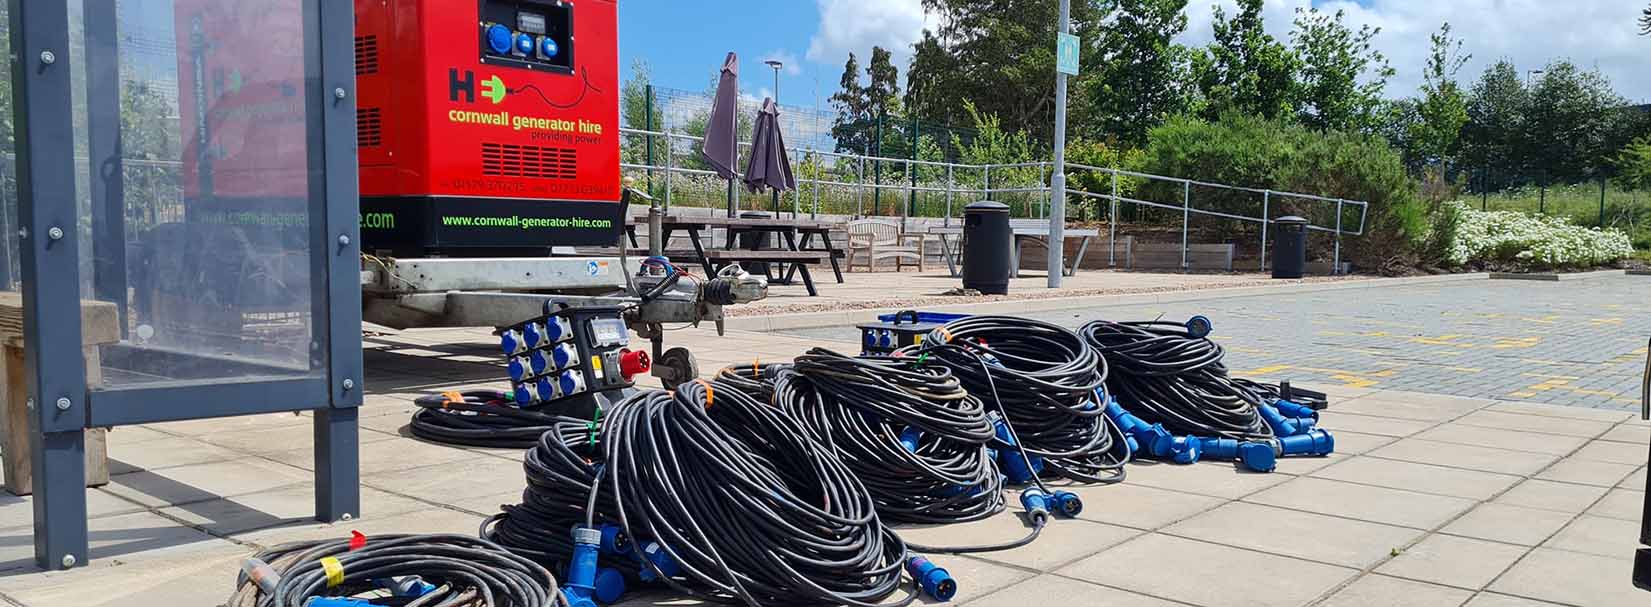 Generator and cables for Lidl family day